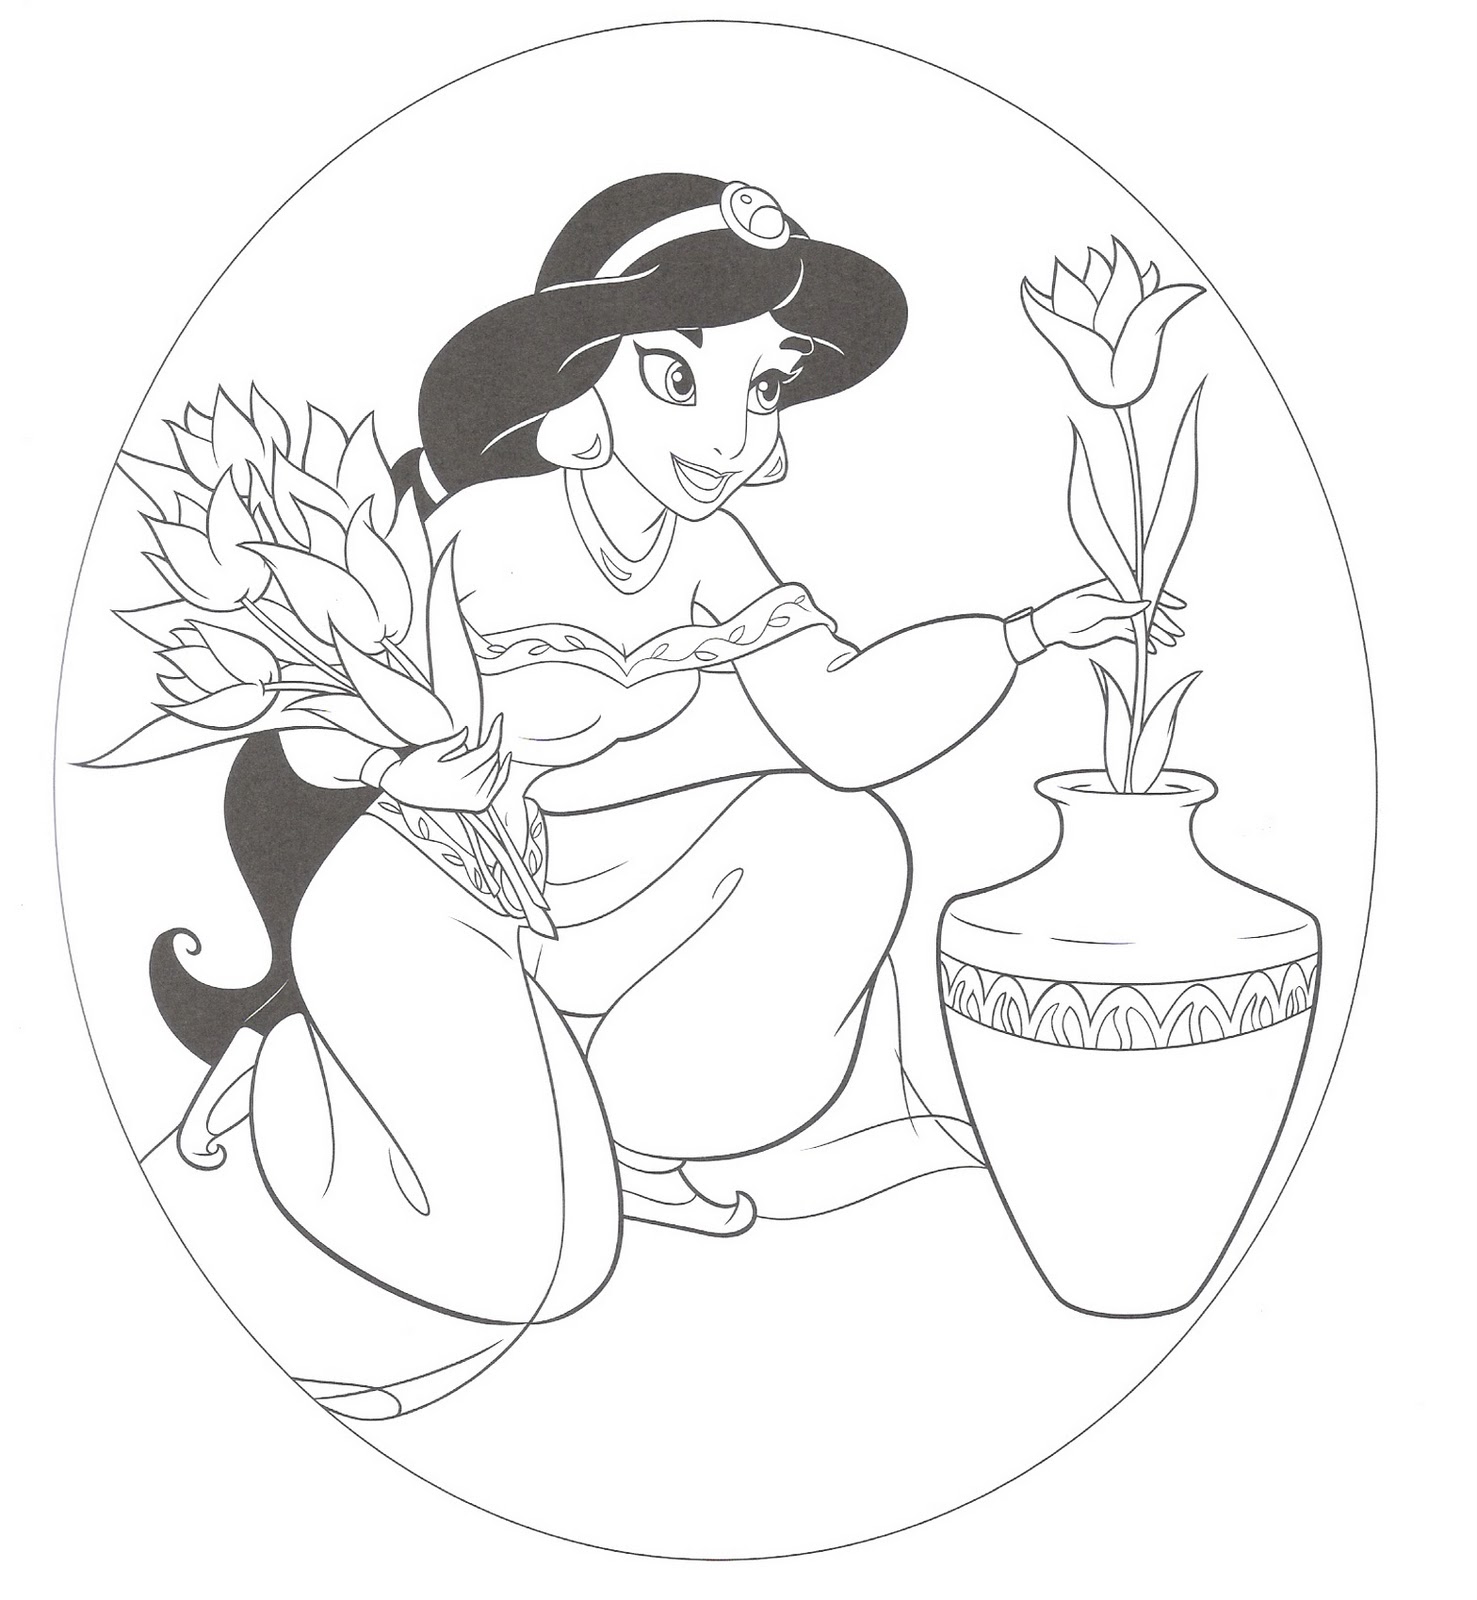 Disney Princess Coloring Pages For Kids BEDECOR Free Coloring Picture wallpaper give a chance to color on the wall without getting in trouble! Fill the walls of your home or office with stress-relieving [bedroomdecorz.blogspot.com]